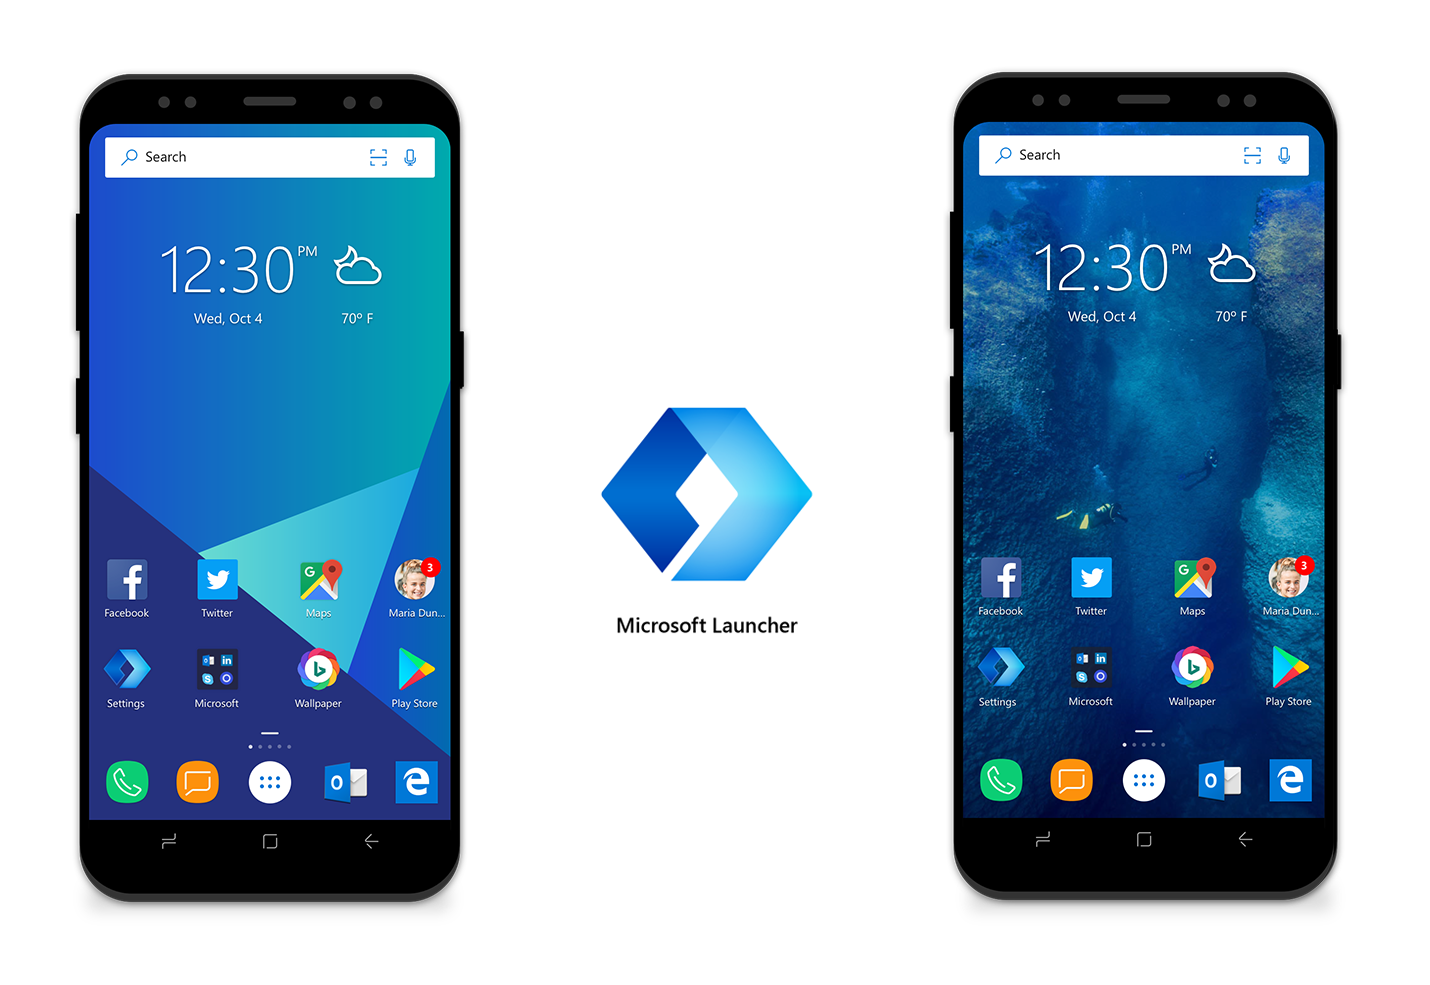 Microsoft Launcher for Android shown on two Android phones